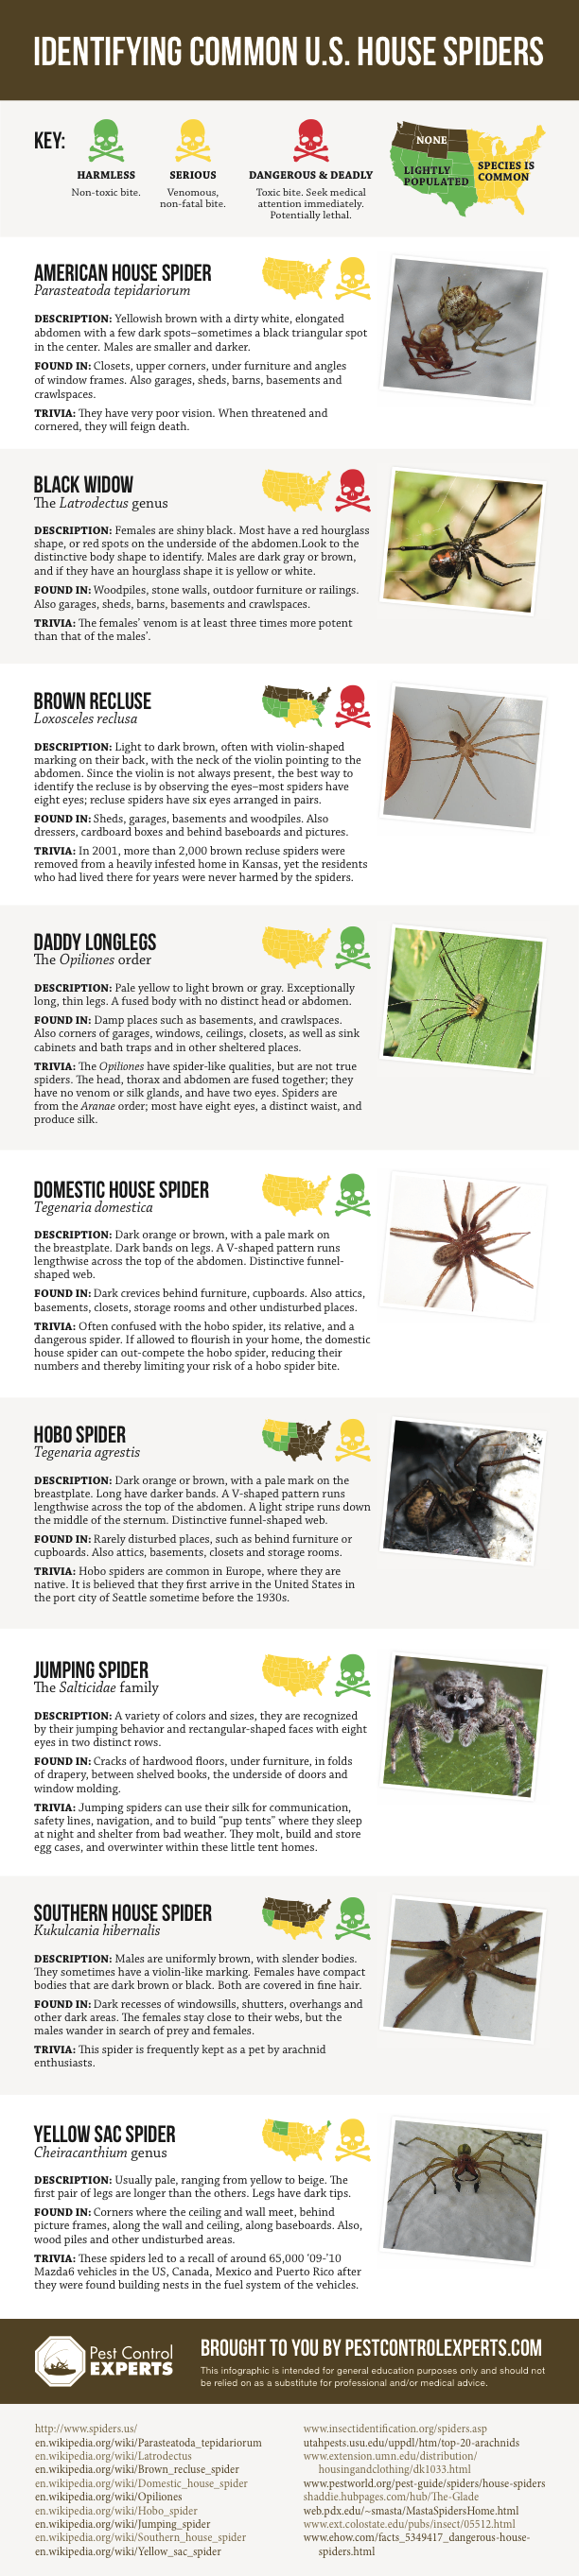 House Spider Identification Chart | Visual.ly